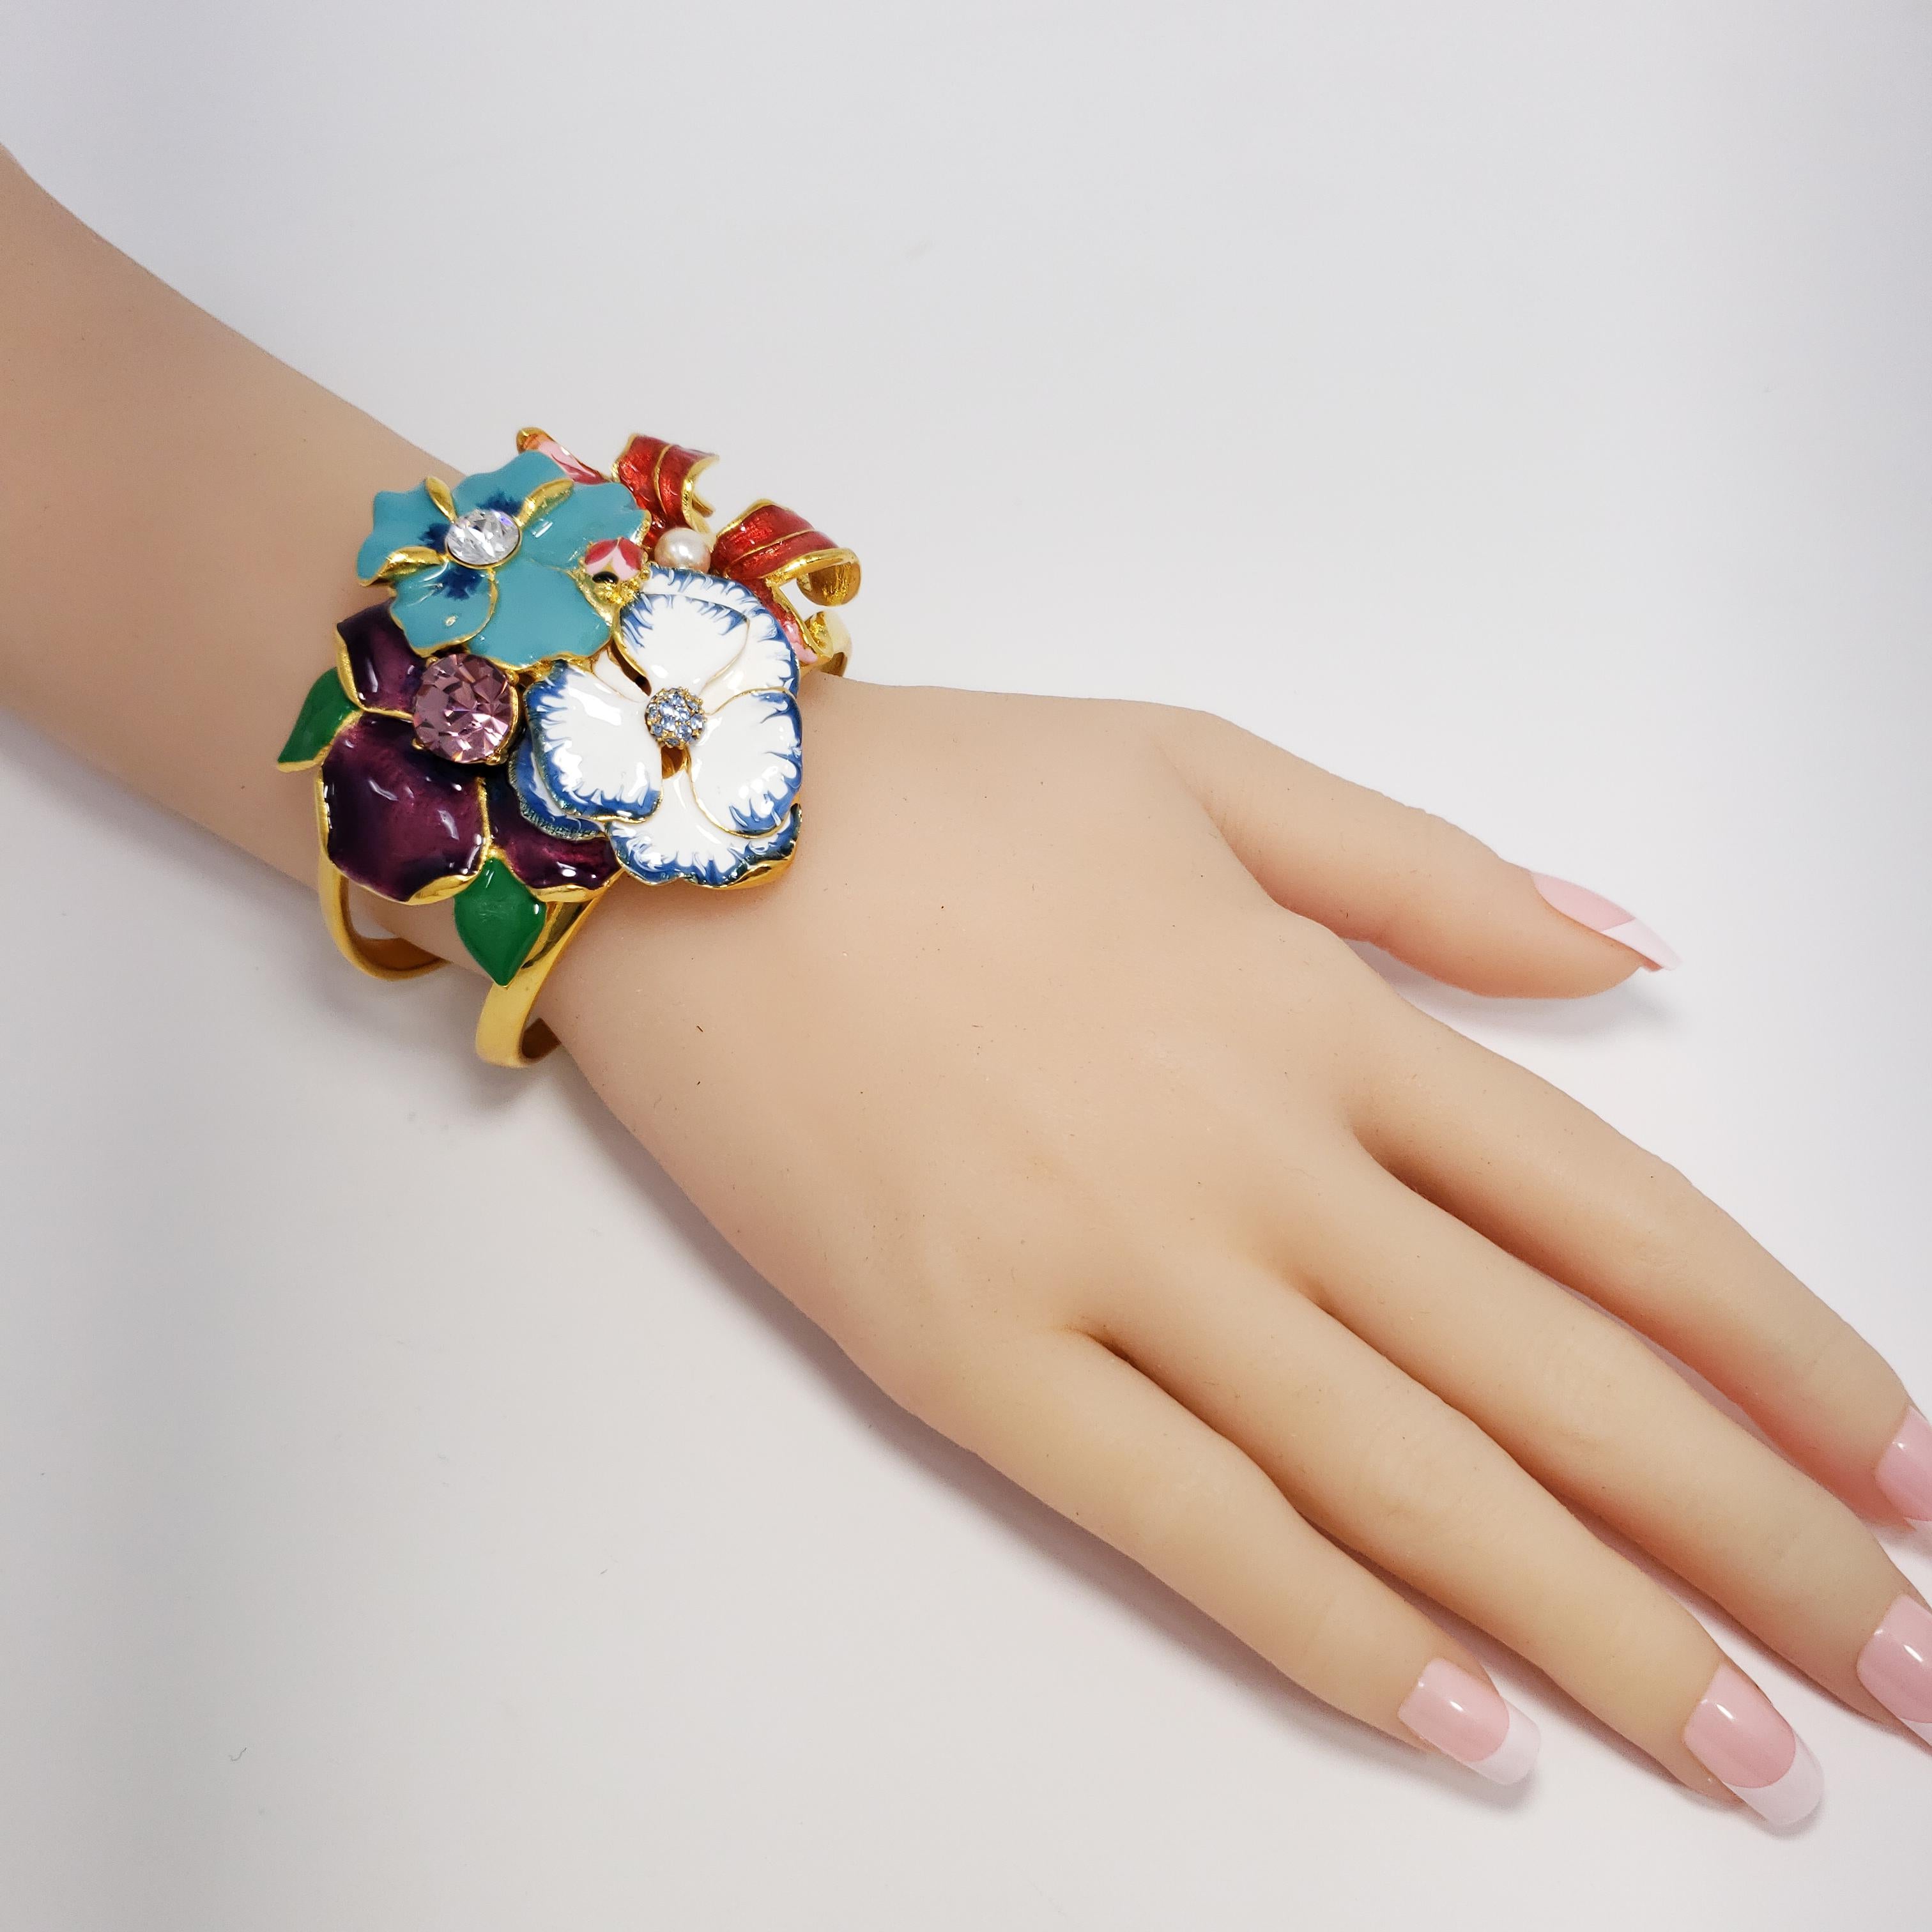 A bracelet by Kenneth Jay Lane featuring an assortment of painted enamel flowers accented with crystals in gold. 

Diameter at widest part: 6.0 cm/ 2.4 in
Inner circumference: 16.5 cm / 6.5 in 

Hallmarks: Kenneth Lane